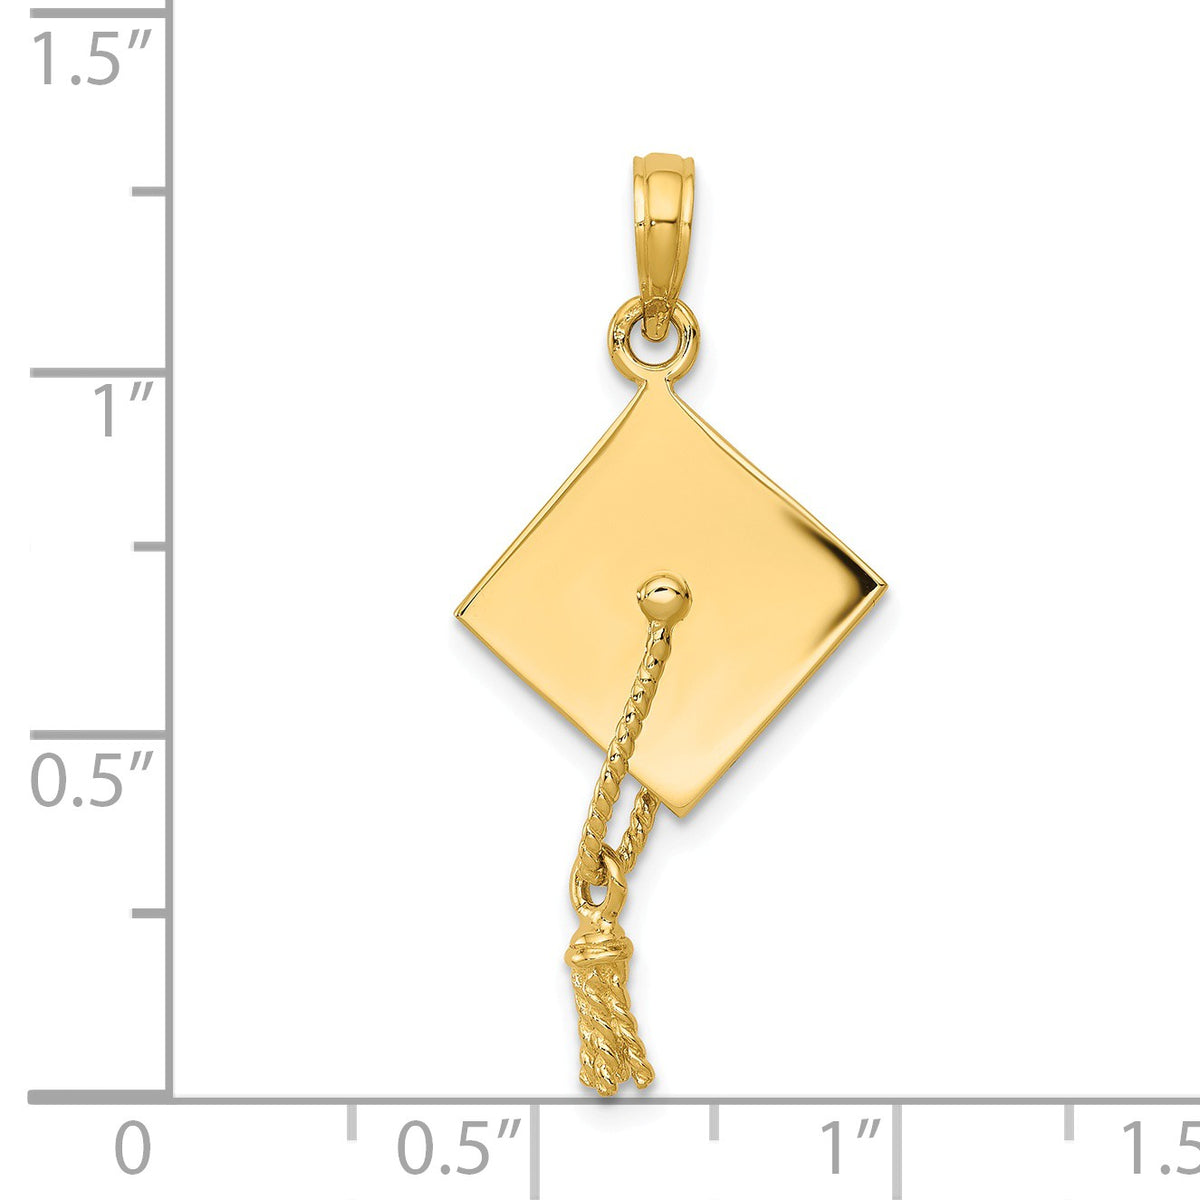 Alternate view of the 14k Yellow Gold 3D Polished Graduation Cap Pendant by The Black Bow Jewelry Co.